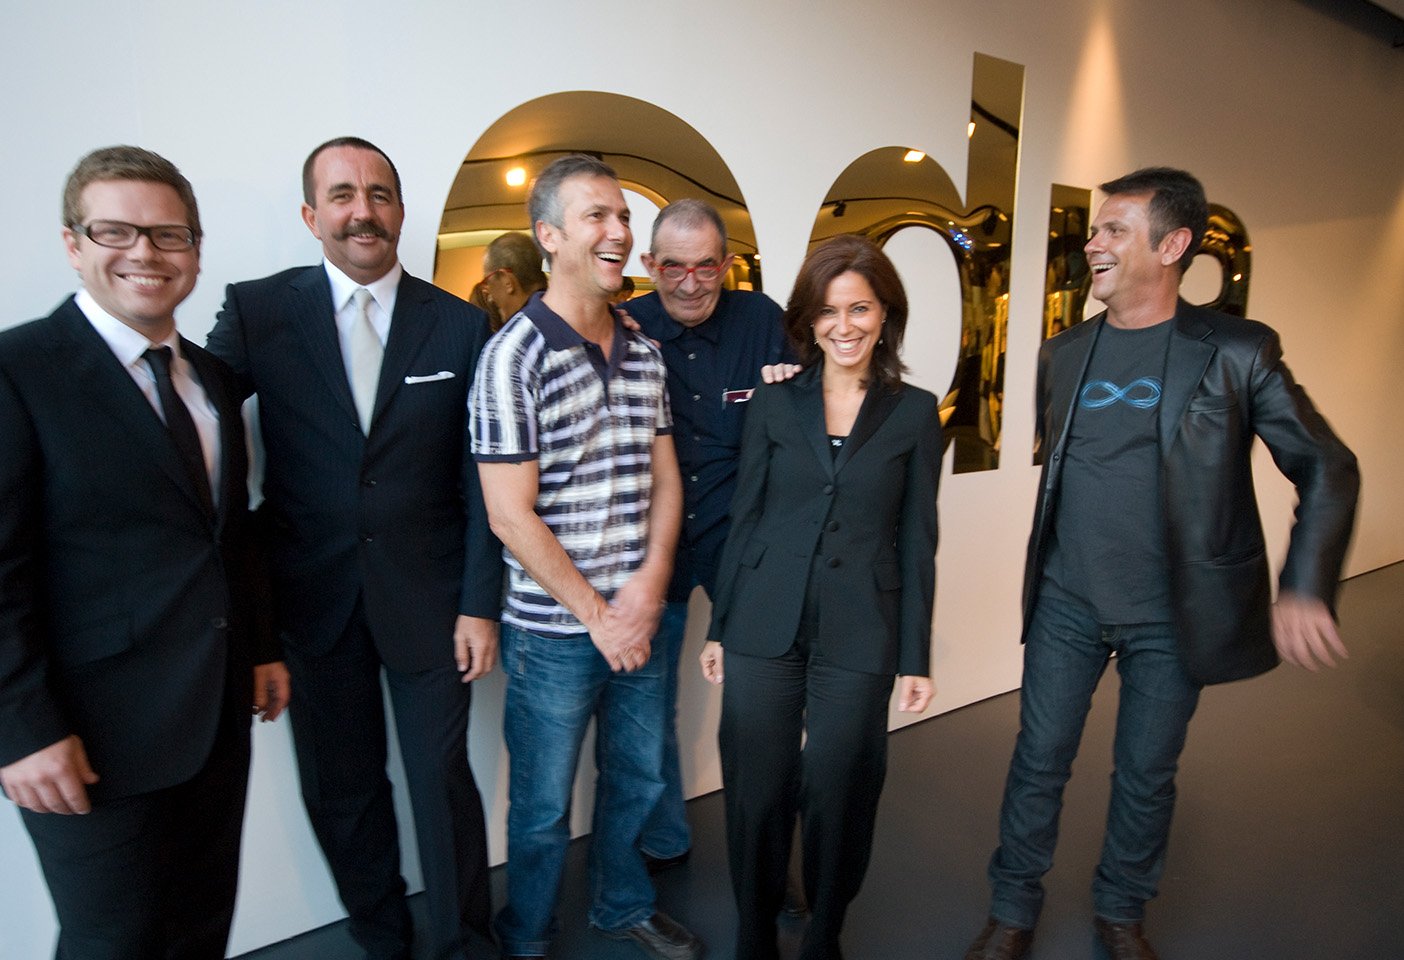 When Edra's Valerio and Monica Mazzei visited Space with Massimo Morozzi and Fernando and Humberto Campana for the Bombay Sapphire Design Discovery Award, here and following. Photos c/o Space.